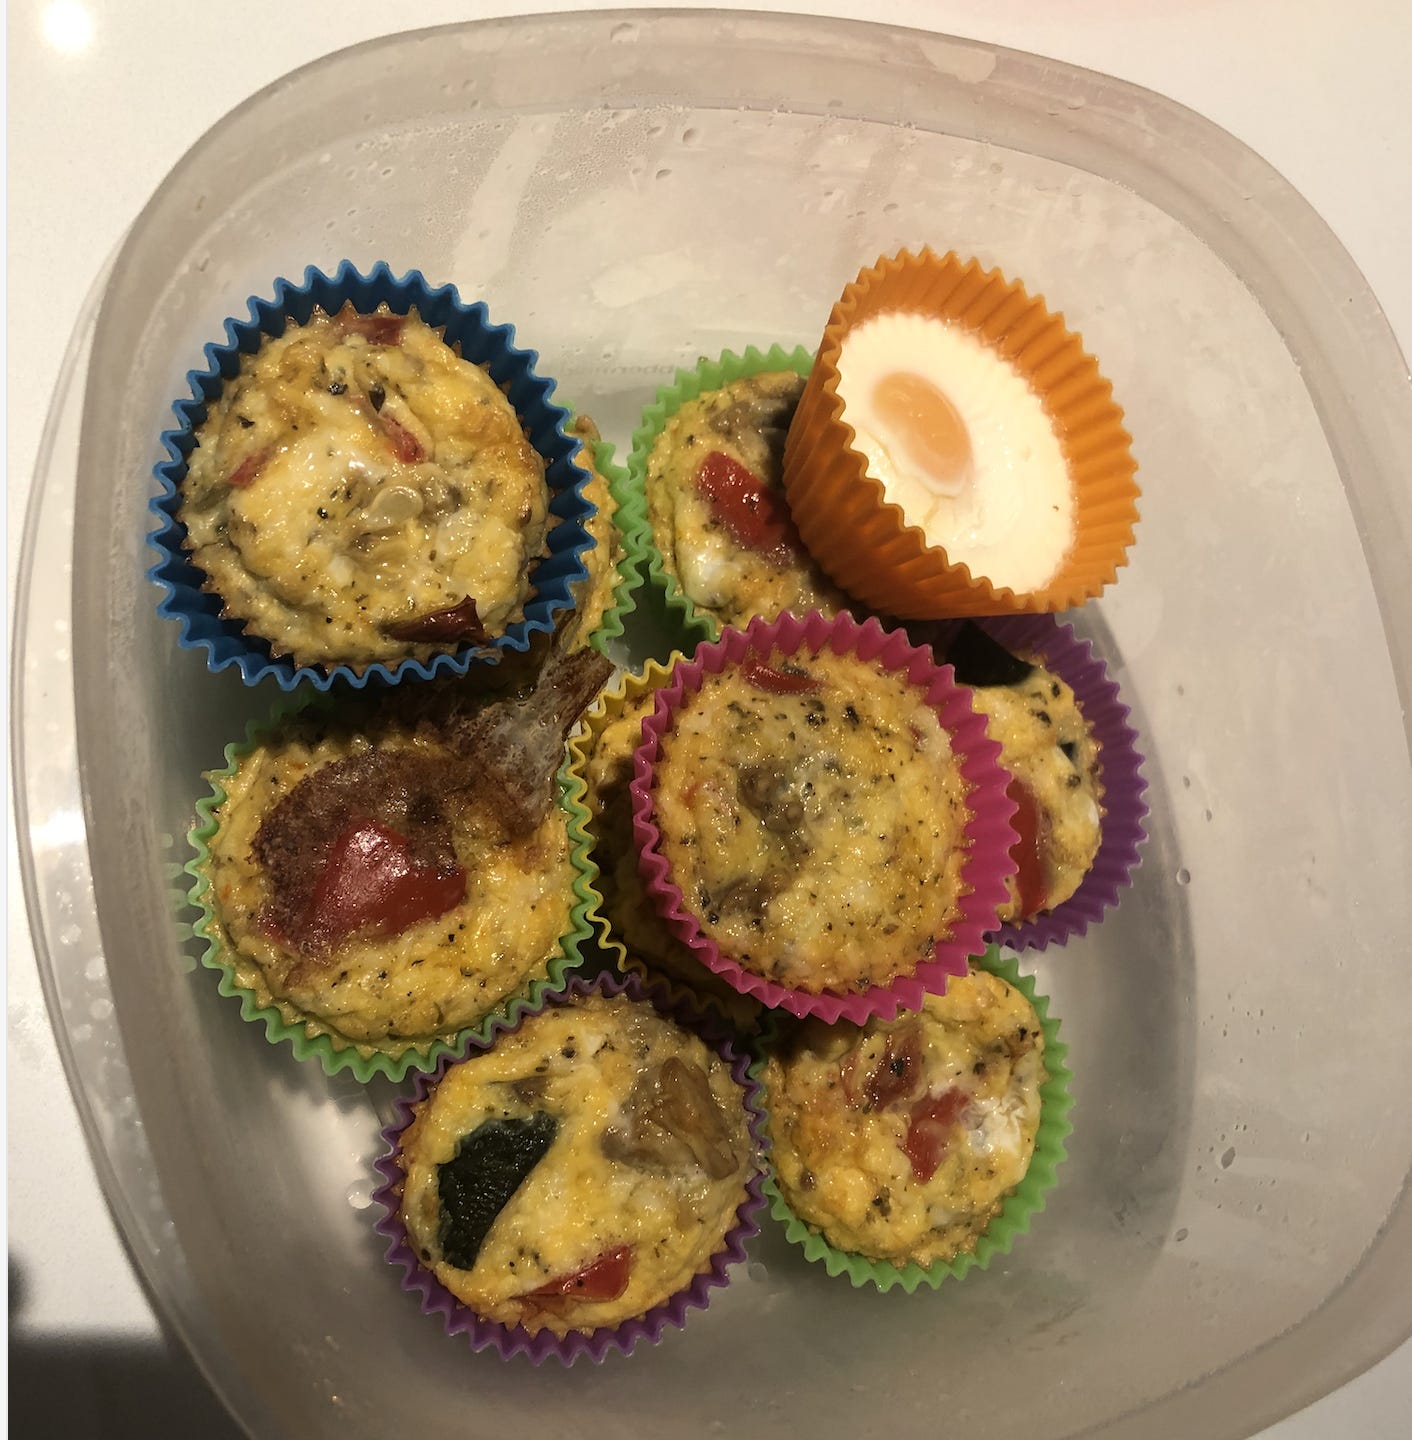 A plate of muffins

Description automatically generated with medium confidence